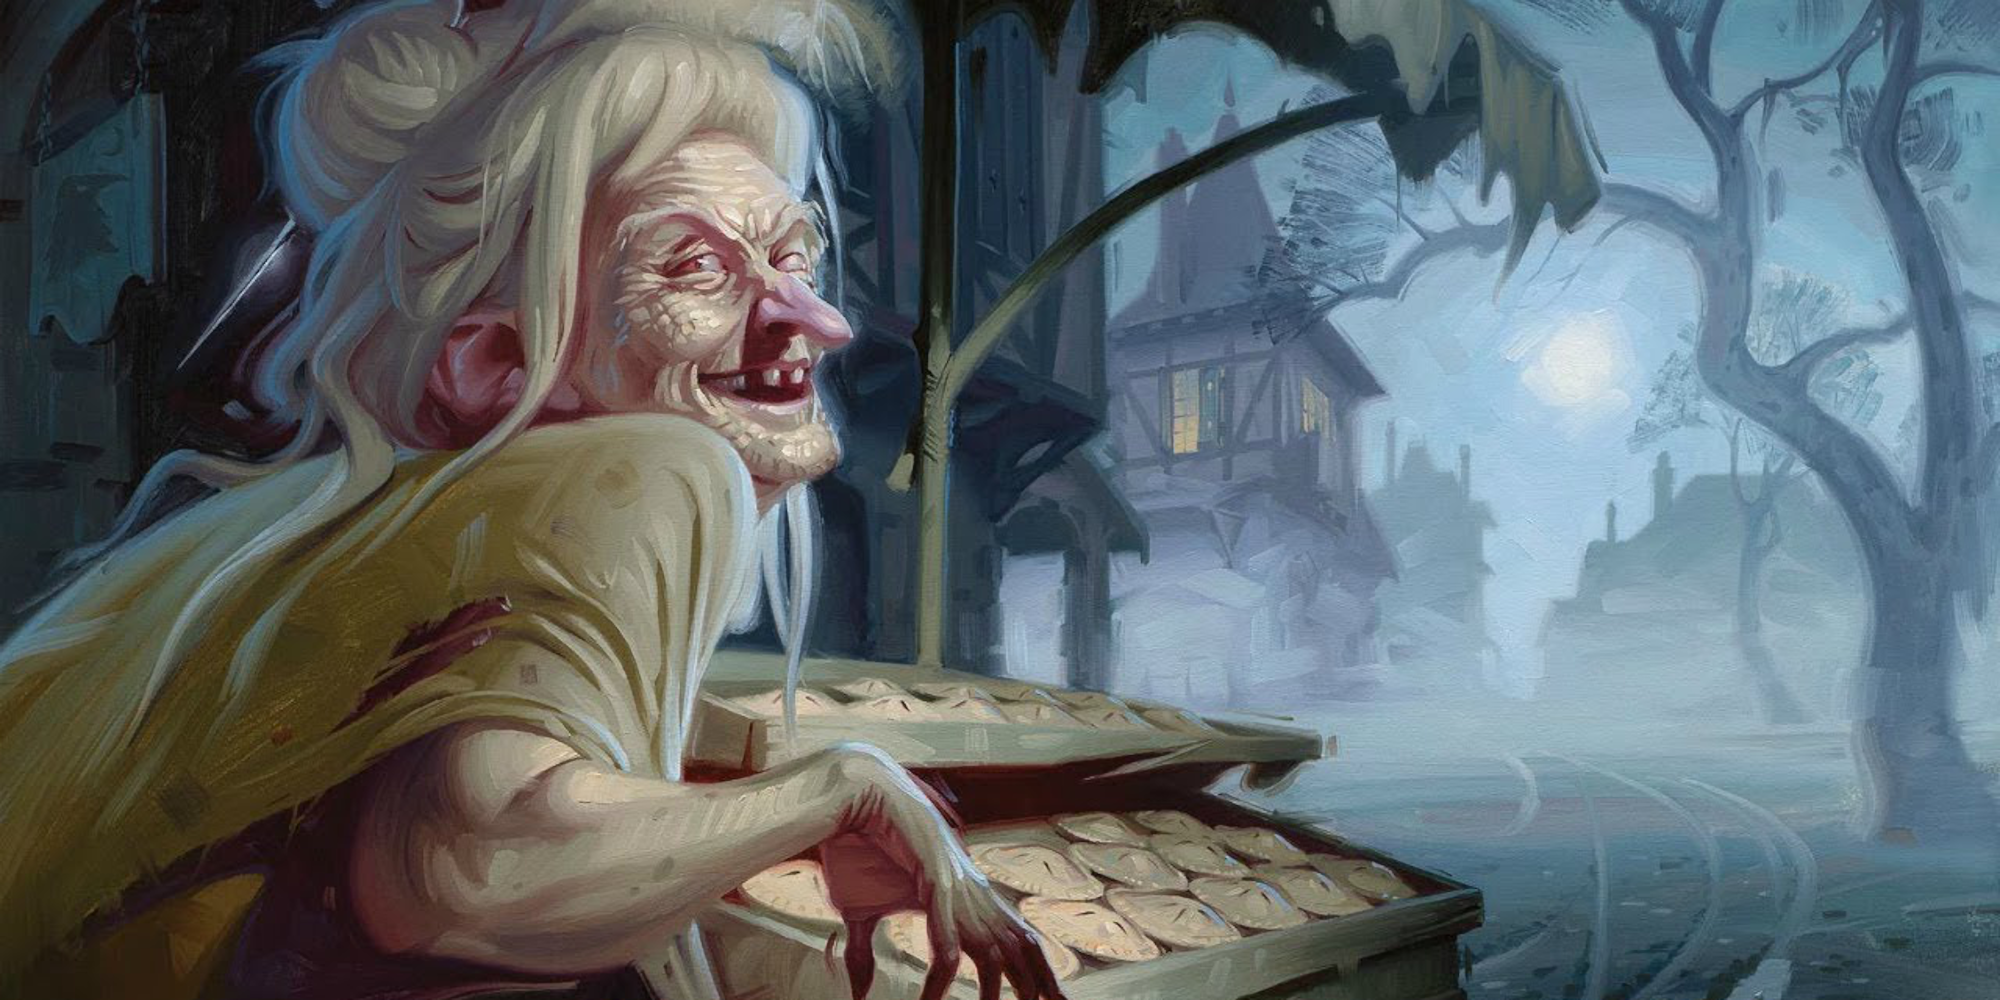 A hag looks back at you with an evil smile.